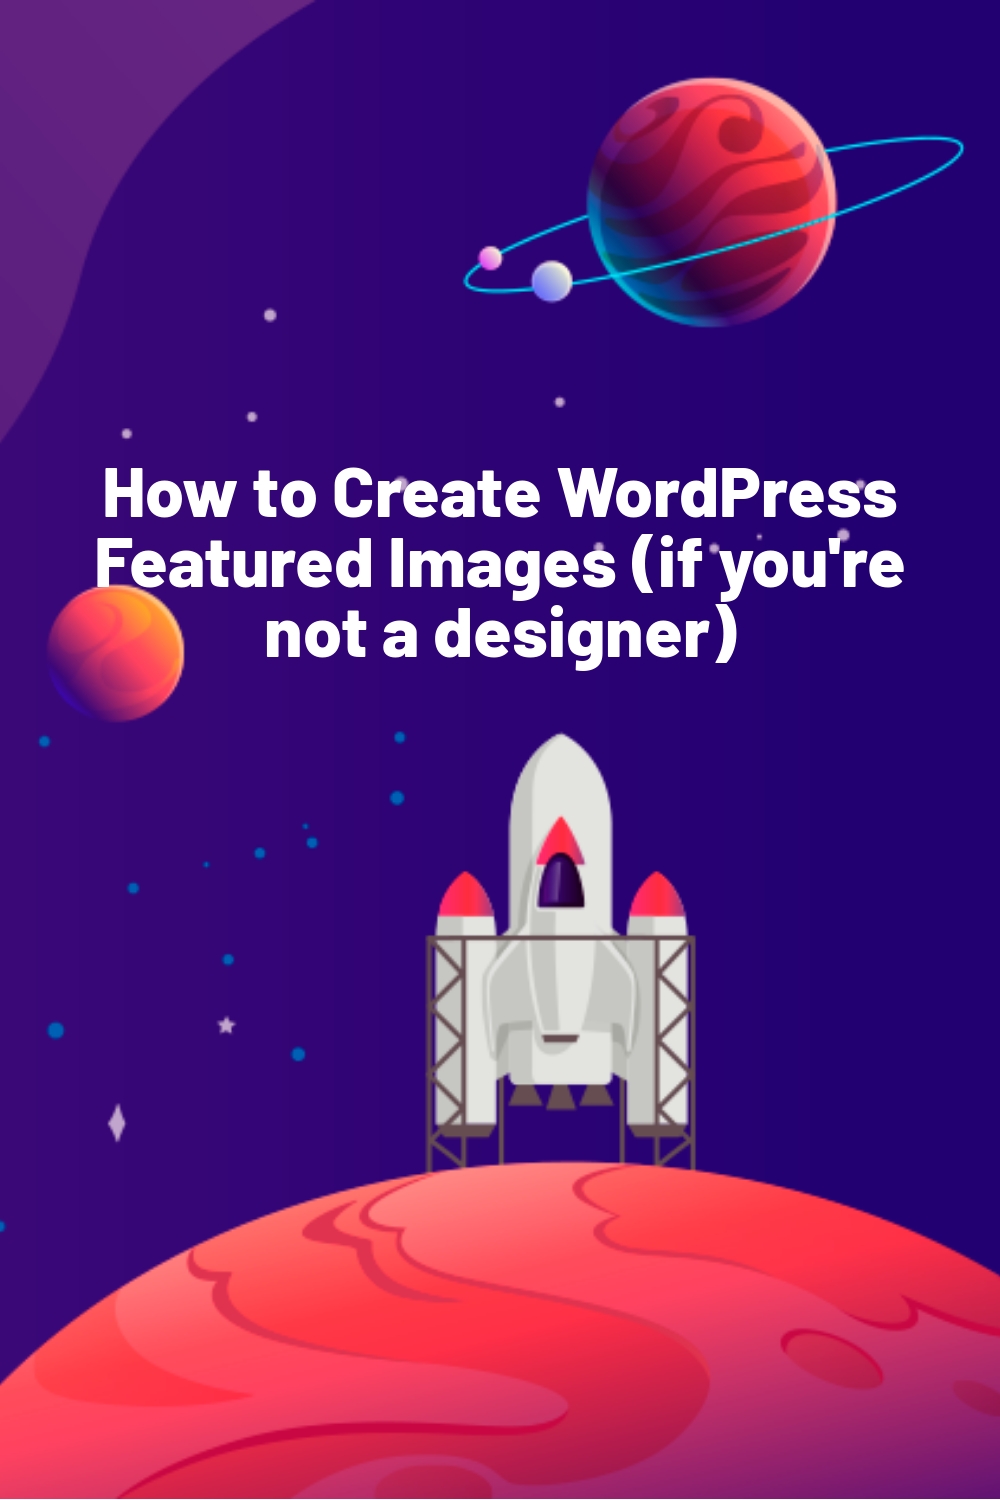 How to Create WordPress Featured Images (if you’re not a designer)